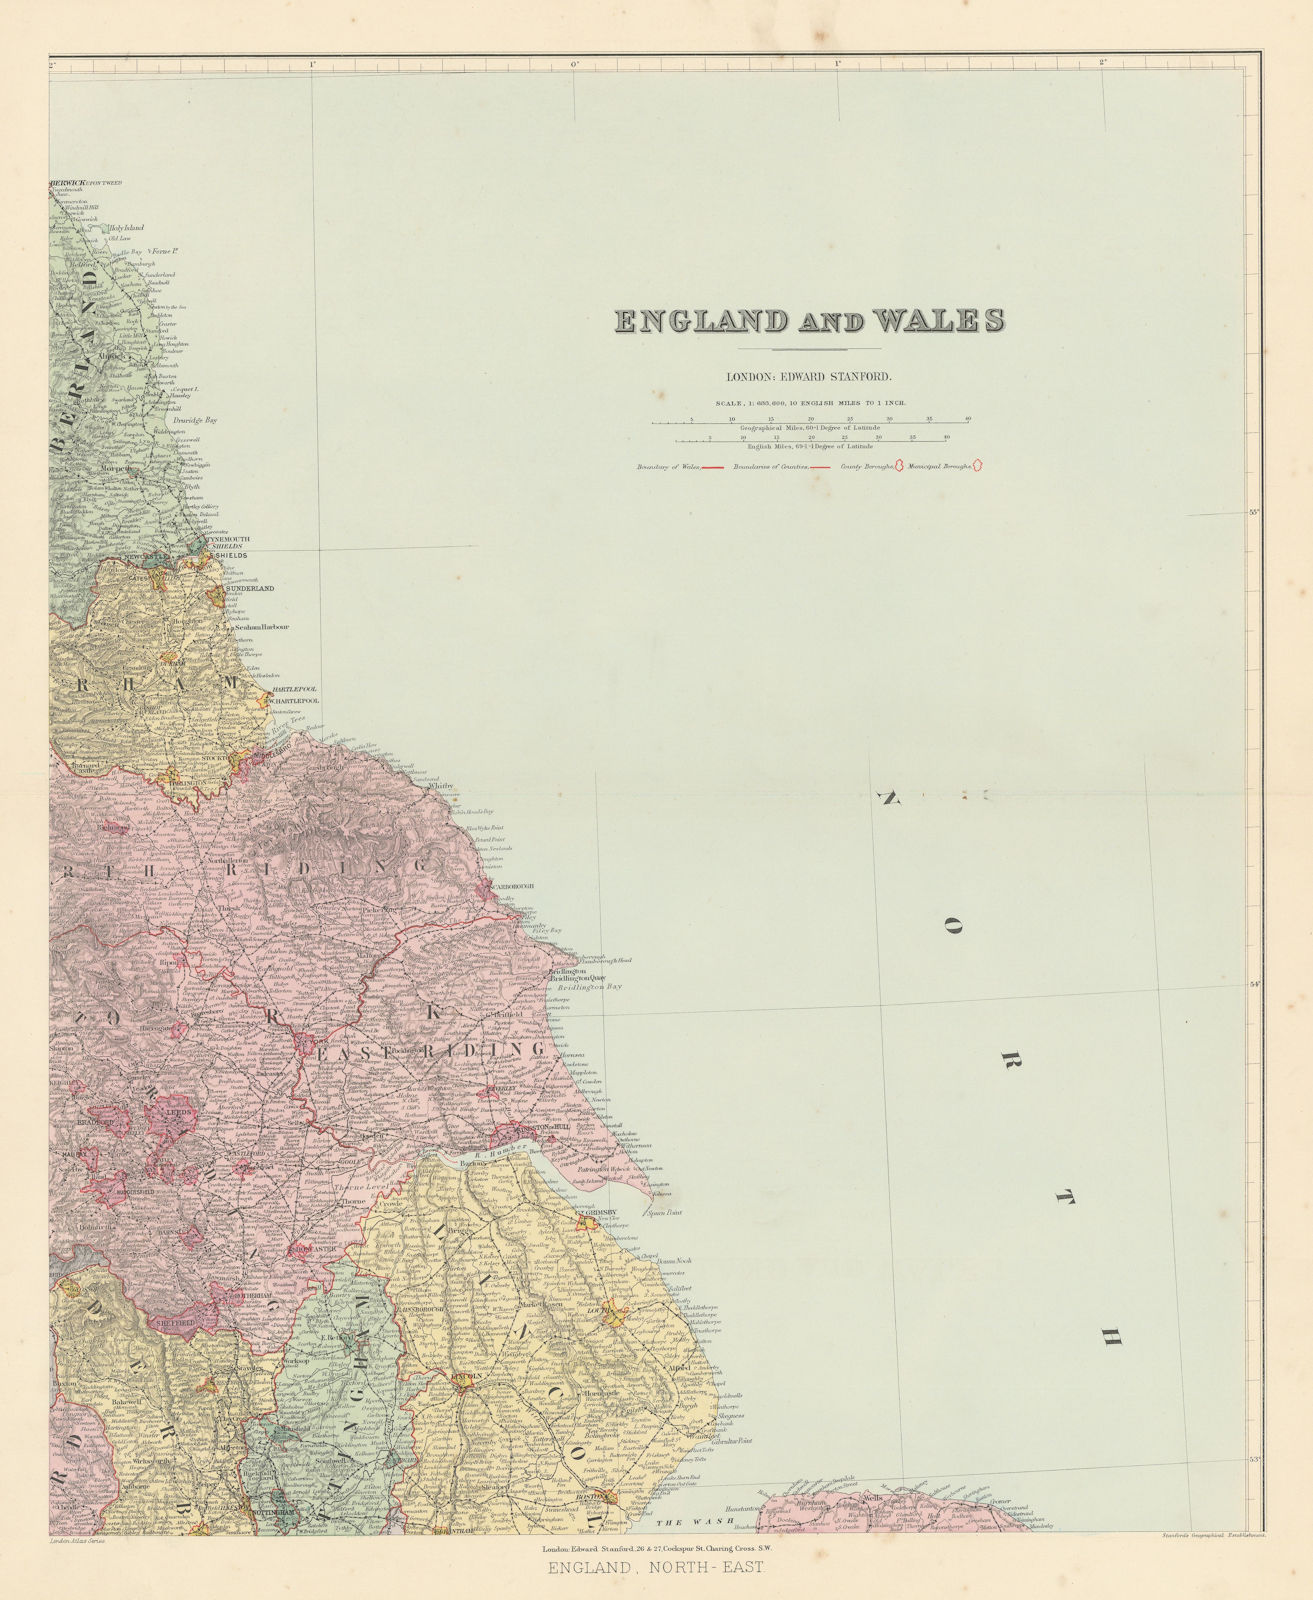 Associate Product North east England. Tyneside Yorkshire Lincolnshire. 61x50cm STANFORD 1894 map